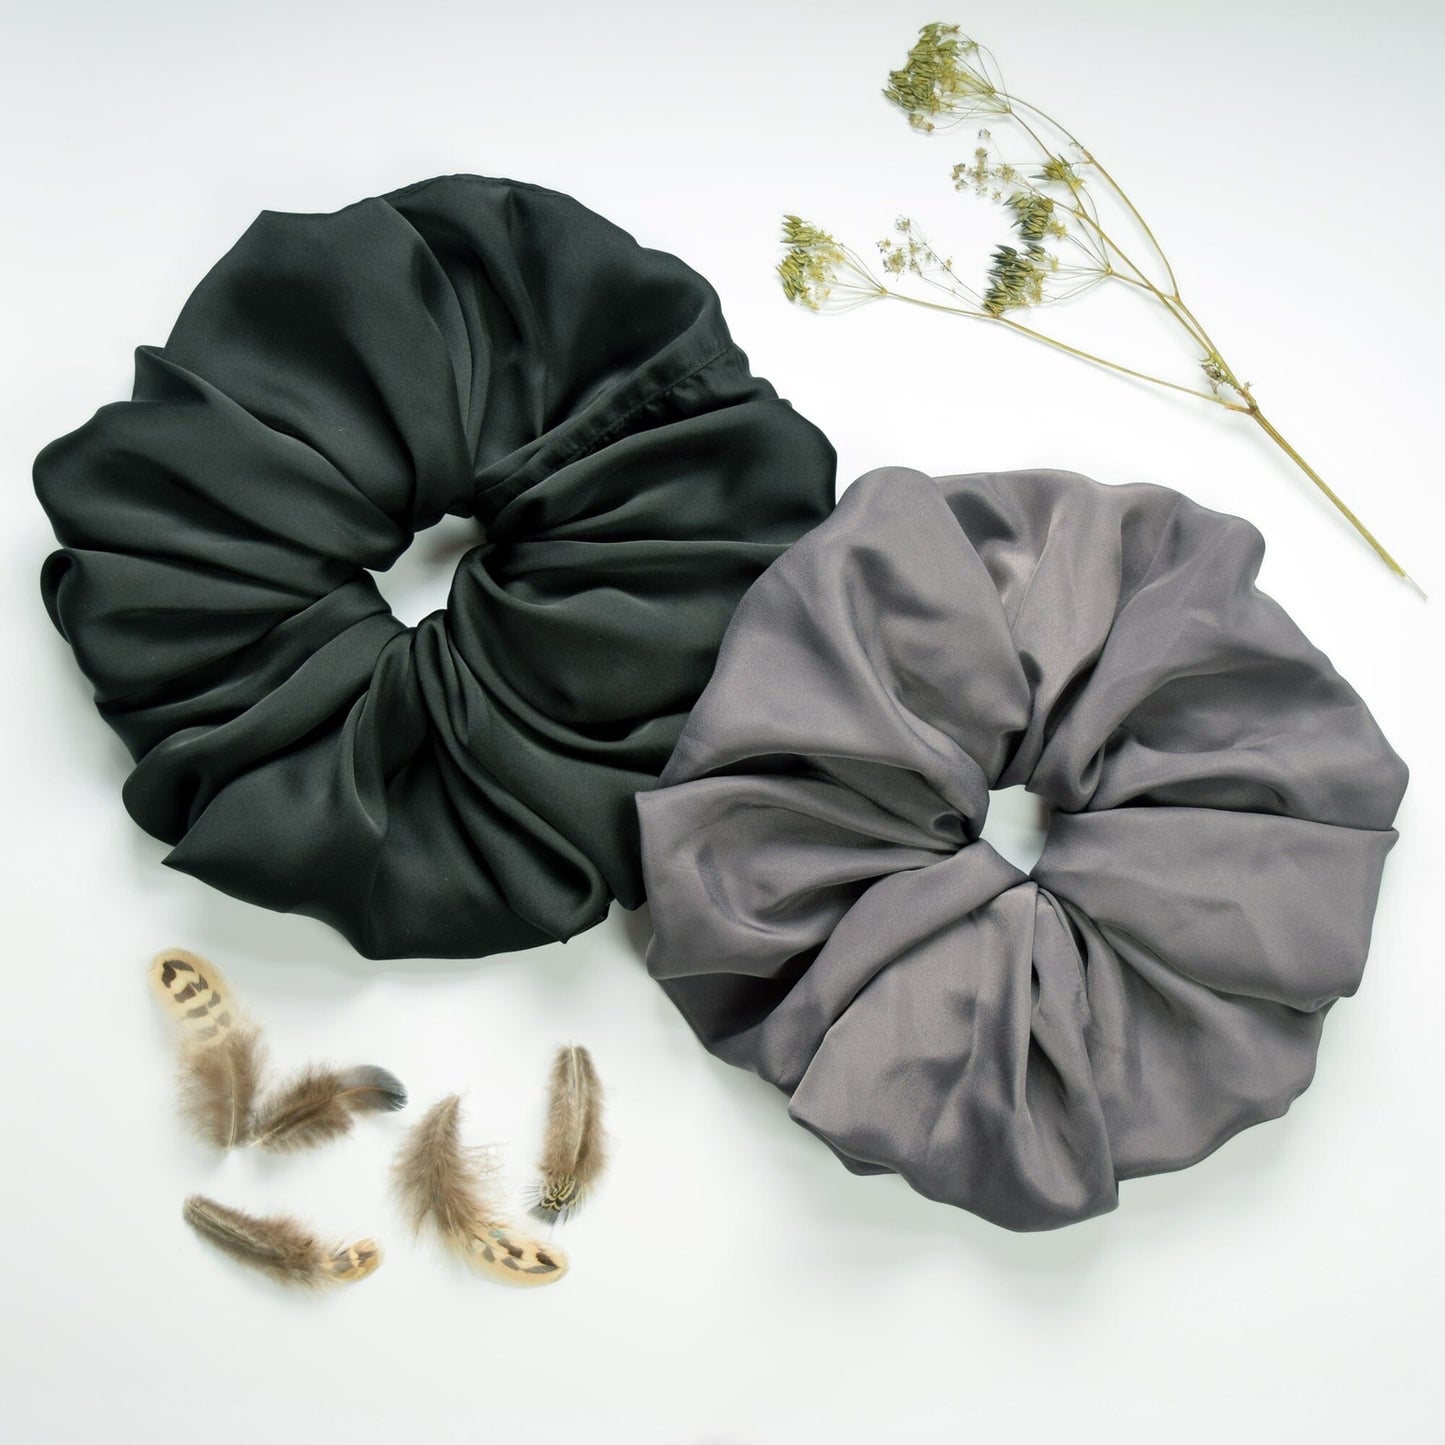 Oversized Giant Scrunchies Set in Black and Grey